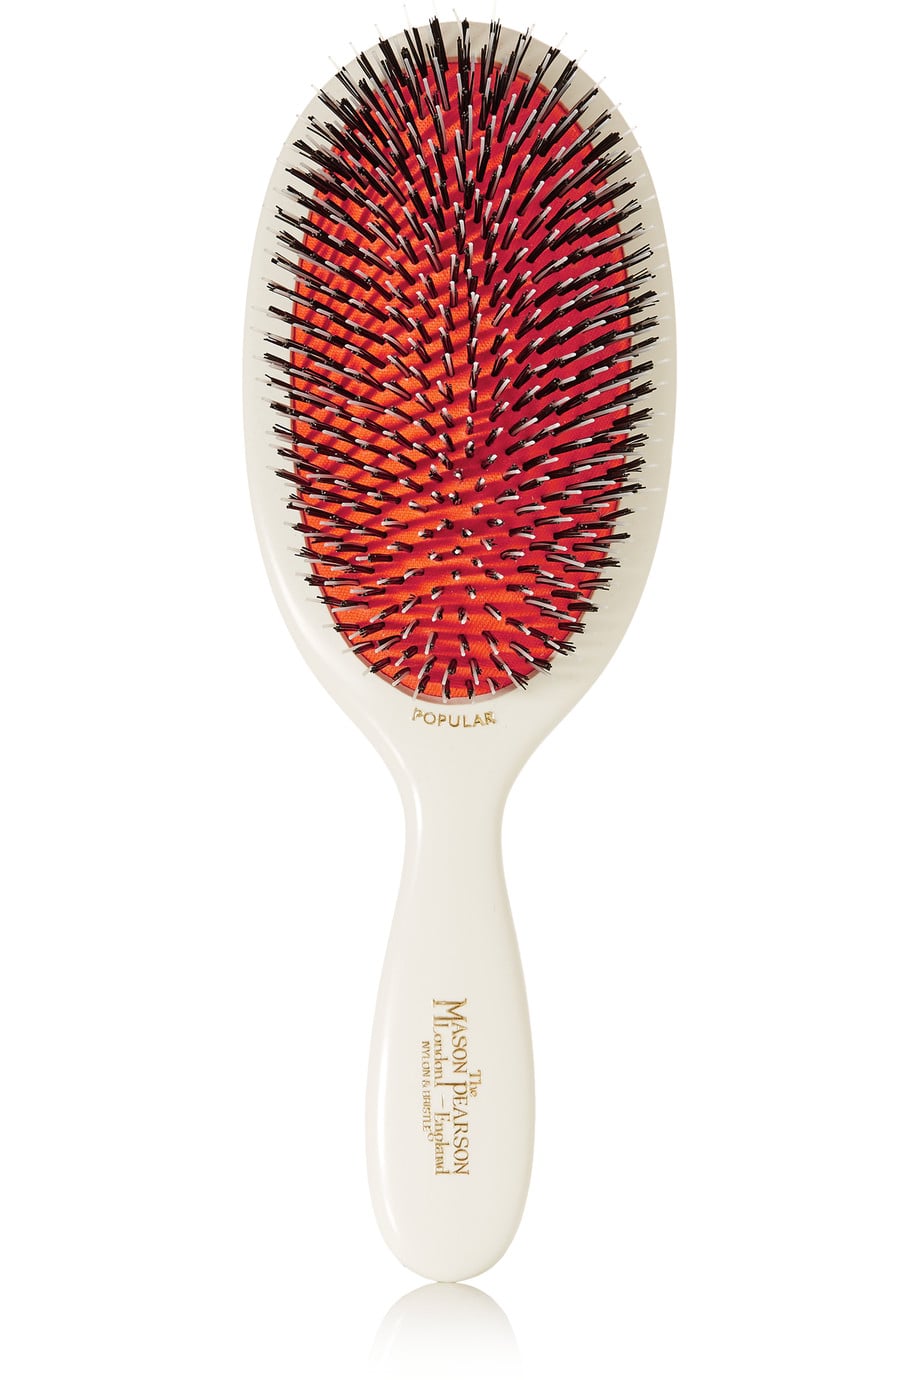 Who Invented the Hairbrush? | POPSUGAR Beauty